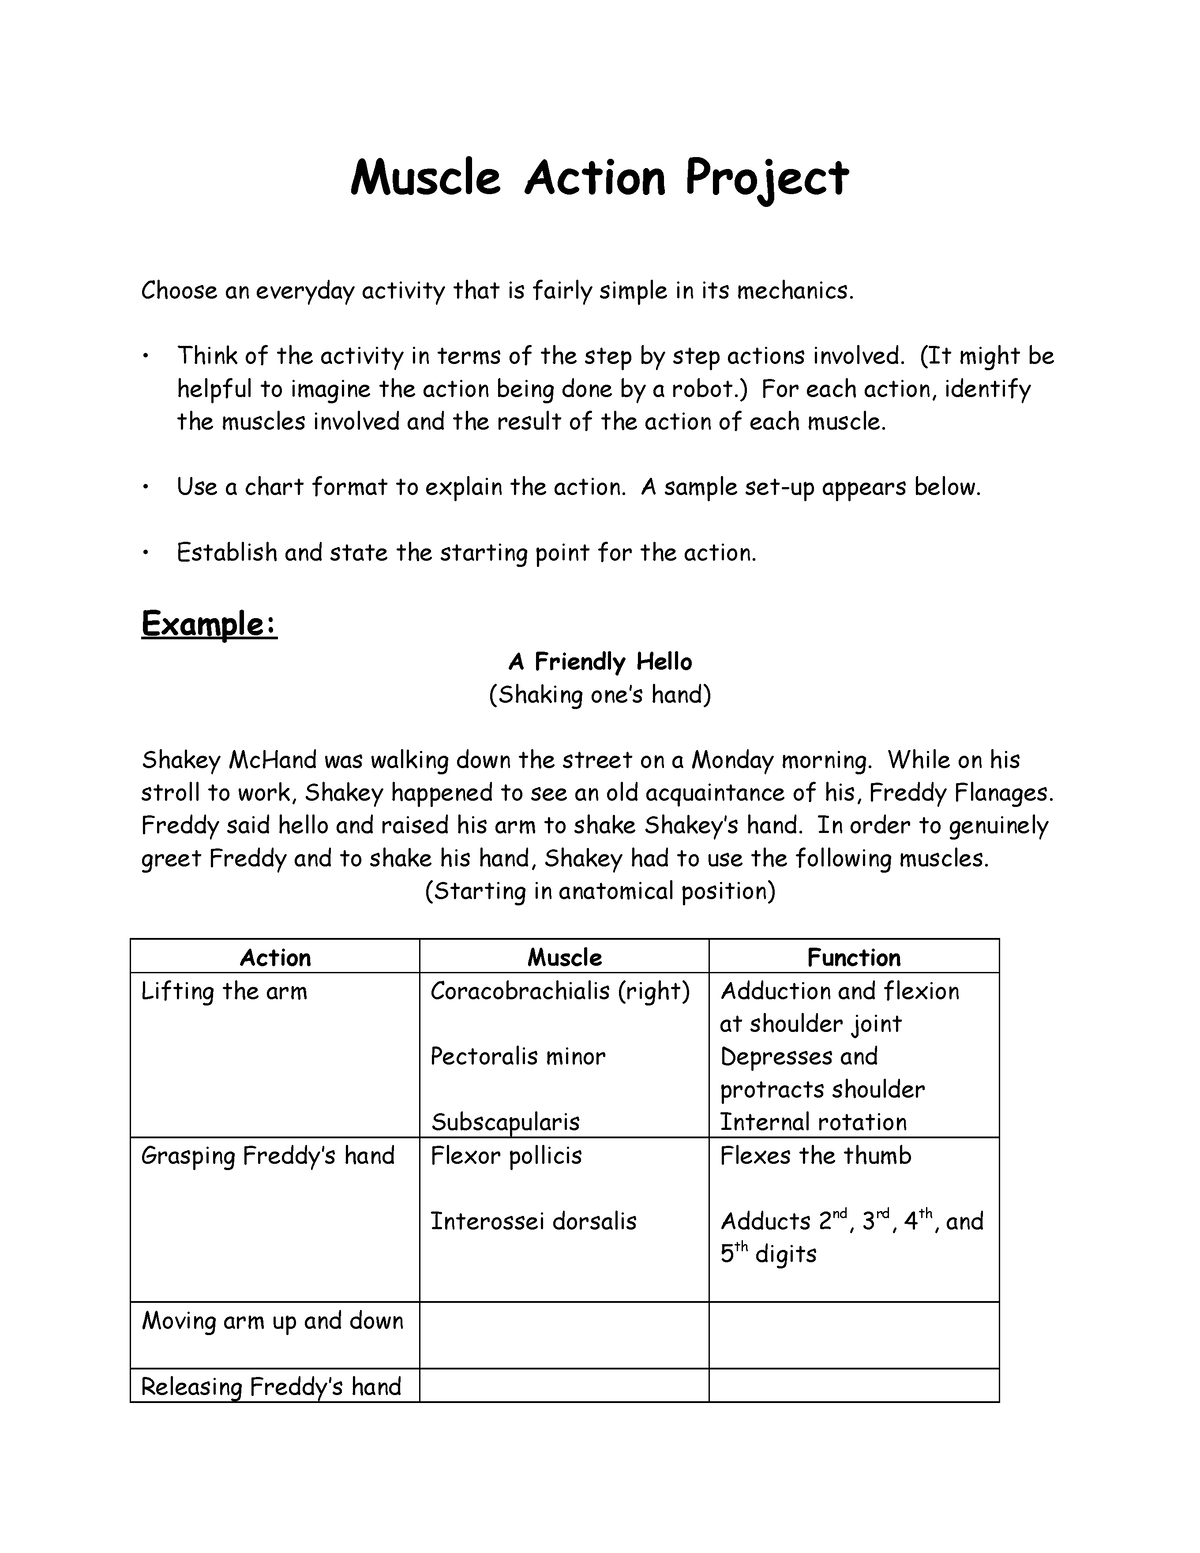 intro-a-p-chpt-5-muscle-action-project-activity-muscle-action-project